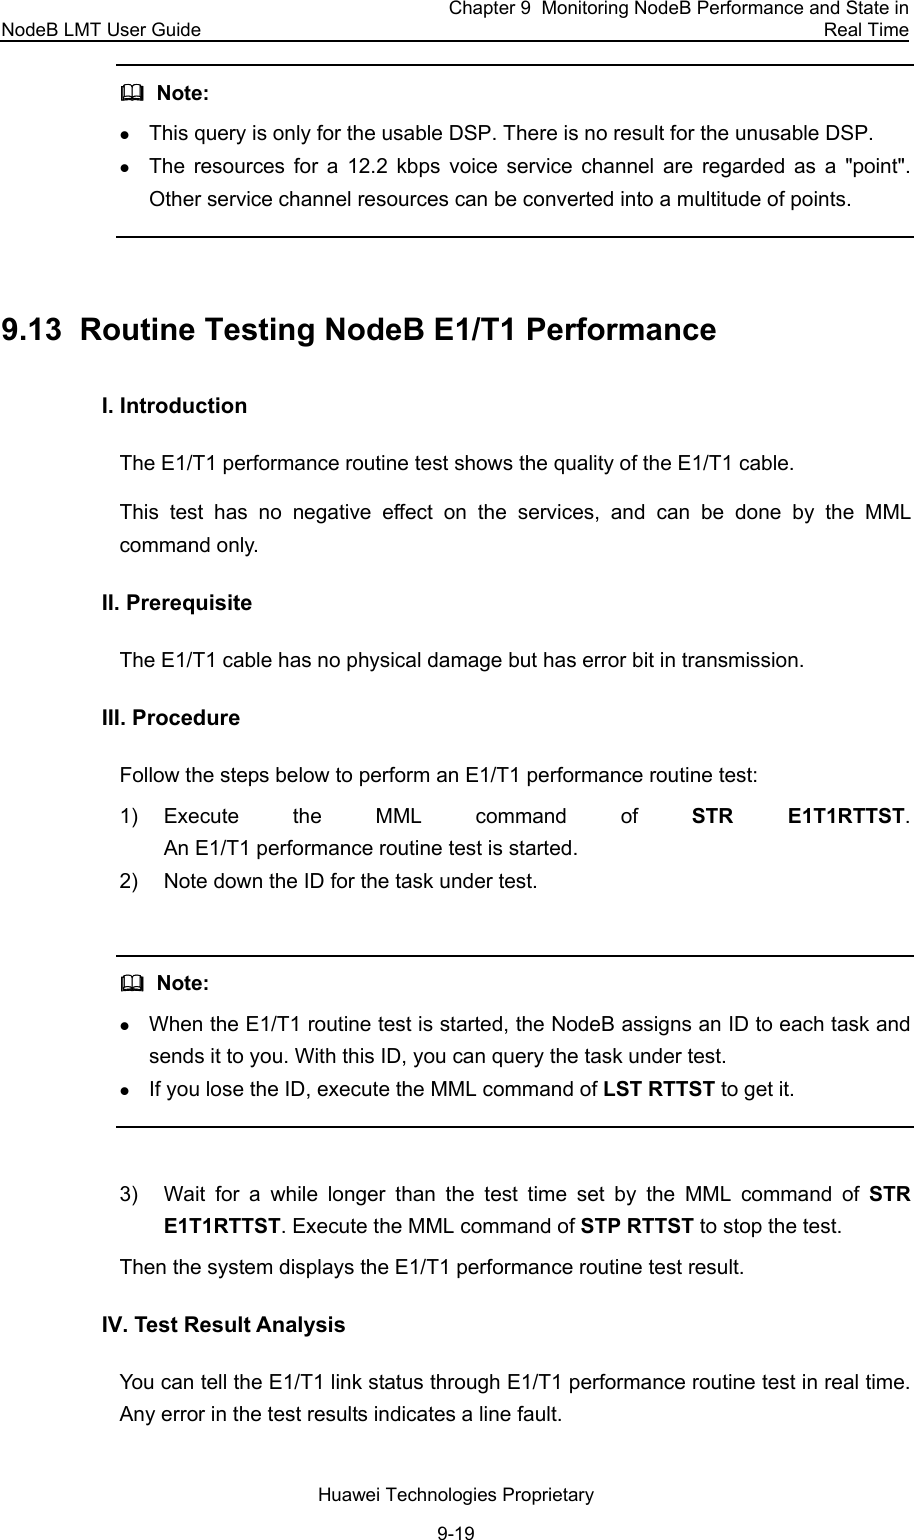 NodeB LMT User Guide Chapter 9  Monitoring NodeB Performance and State in Real Time Huawei Technologies Proprietary 9-19   Note:  z This query is only for the usable DSP. There is no result for the unusable DSP. z The resources for a 12.2 kbps voice service channel are regarded as a &quot;point&quot;. Other service channel resources can be converted into a multitude of points.  9.13  Routine Testing NodeB E1/T1 Performance I. Introduction  The E1/T1 performance routine test shows the quality of the E1/T1 cable.  This test has no negative effect on the services, and can be done by the MML command only.  II. Prerequisite The E1/T1 cable has no physical damage but has error bit in transmission.  III. Procedure Follow the steps below to perform an E1/T1 performance routine test:  1) Execute the MML command of STR E1T1RTTST. An E1/T1 performance routine test is started. 2)  Note down the ID for the task under test.    Note:  z When the E1/T1 routine test is started, the NodeB assigns an ID to each task and sends it to you. With this ID, you can query the task under test.  z If you lose the ID, execute the MML command of LST RTTST to get it.  3)  Wait for a while longer than the test time set by the MML command of STR E1T1RTTST. Execute the MML command of STP RTTST to stop the test.  Then the system displays the E1/T1 performance routine test result. IV. Test Result Analysis  You can tell the E1/T1 link status through E1/T1 performance routine test in real time. Any error in the test results indicates a line fault.  